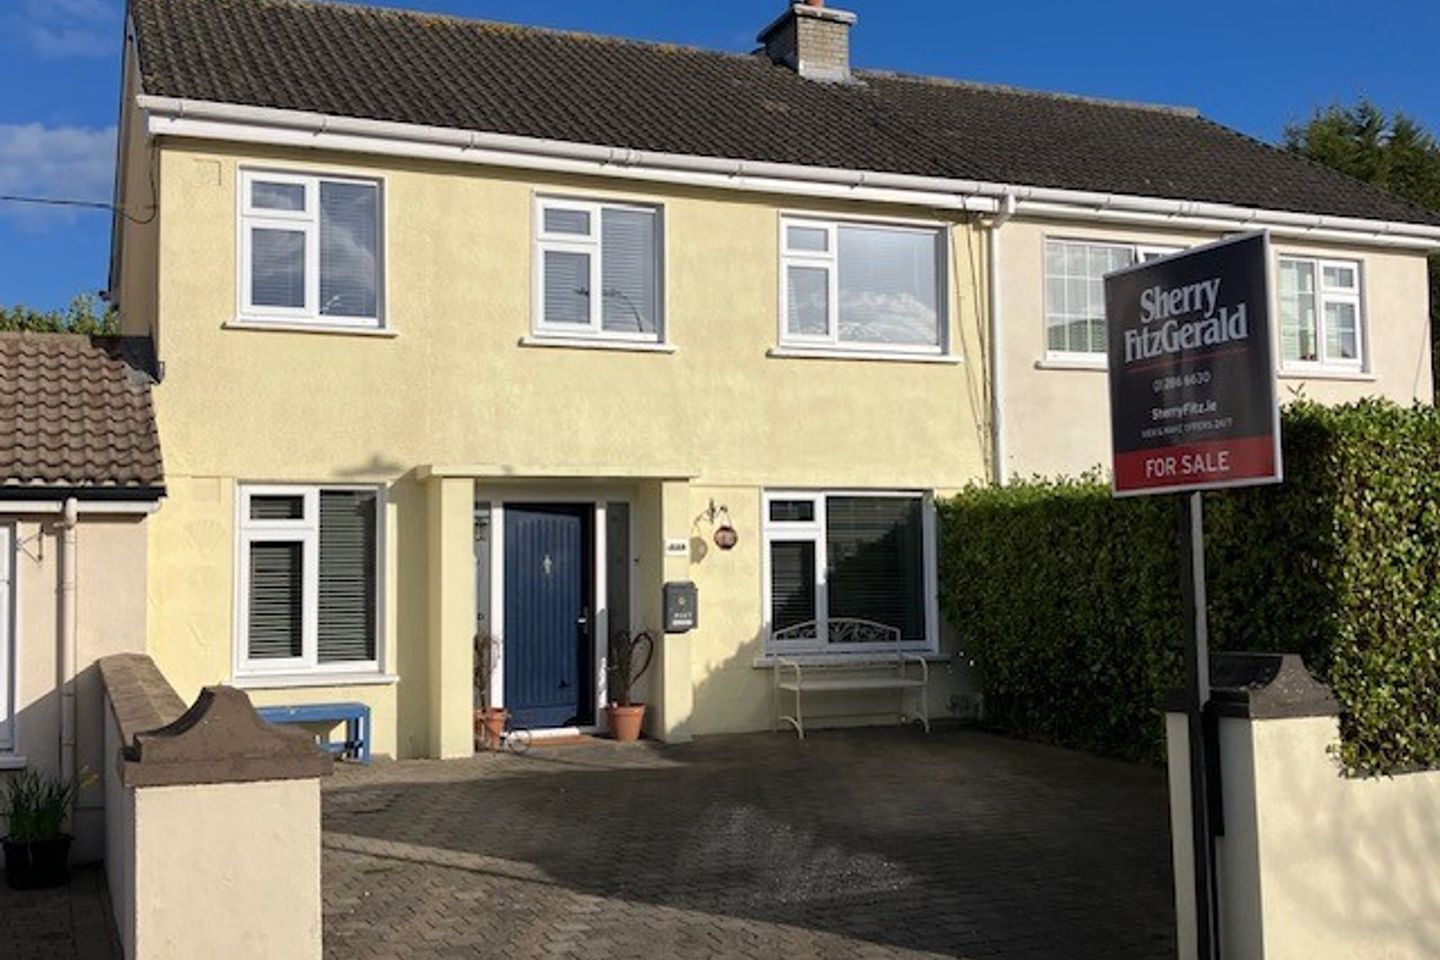 111 Mountain View, Boghall Road, Bray, Co Wicklow, A98KW86